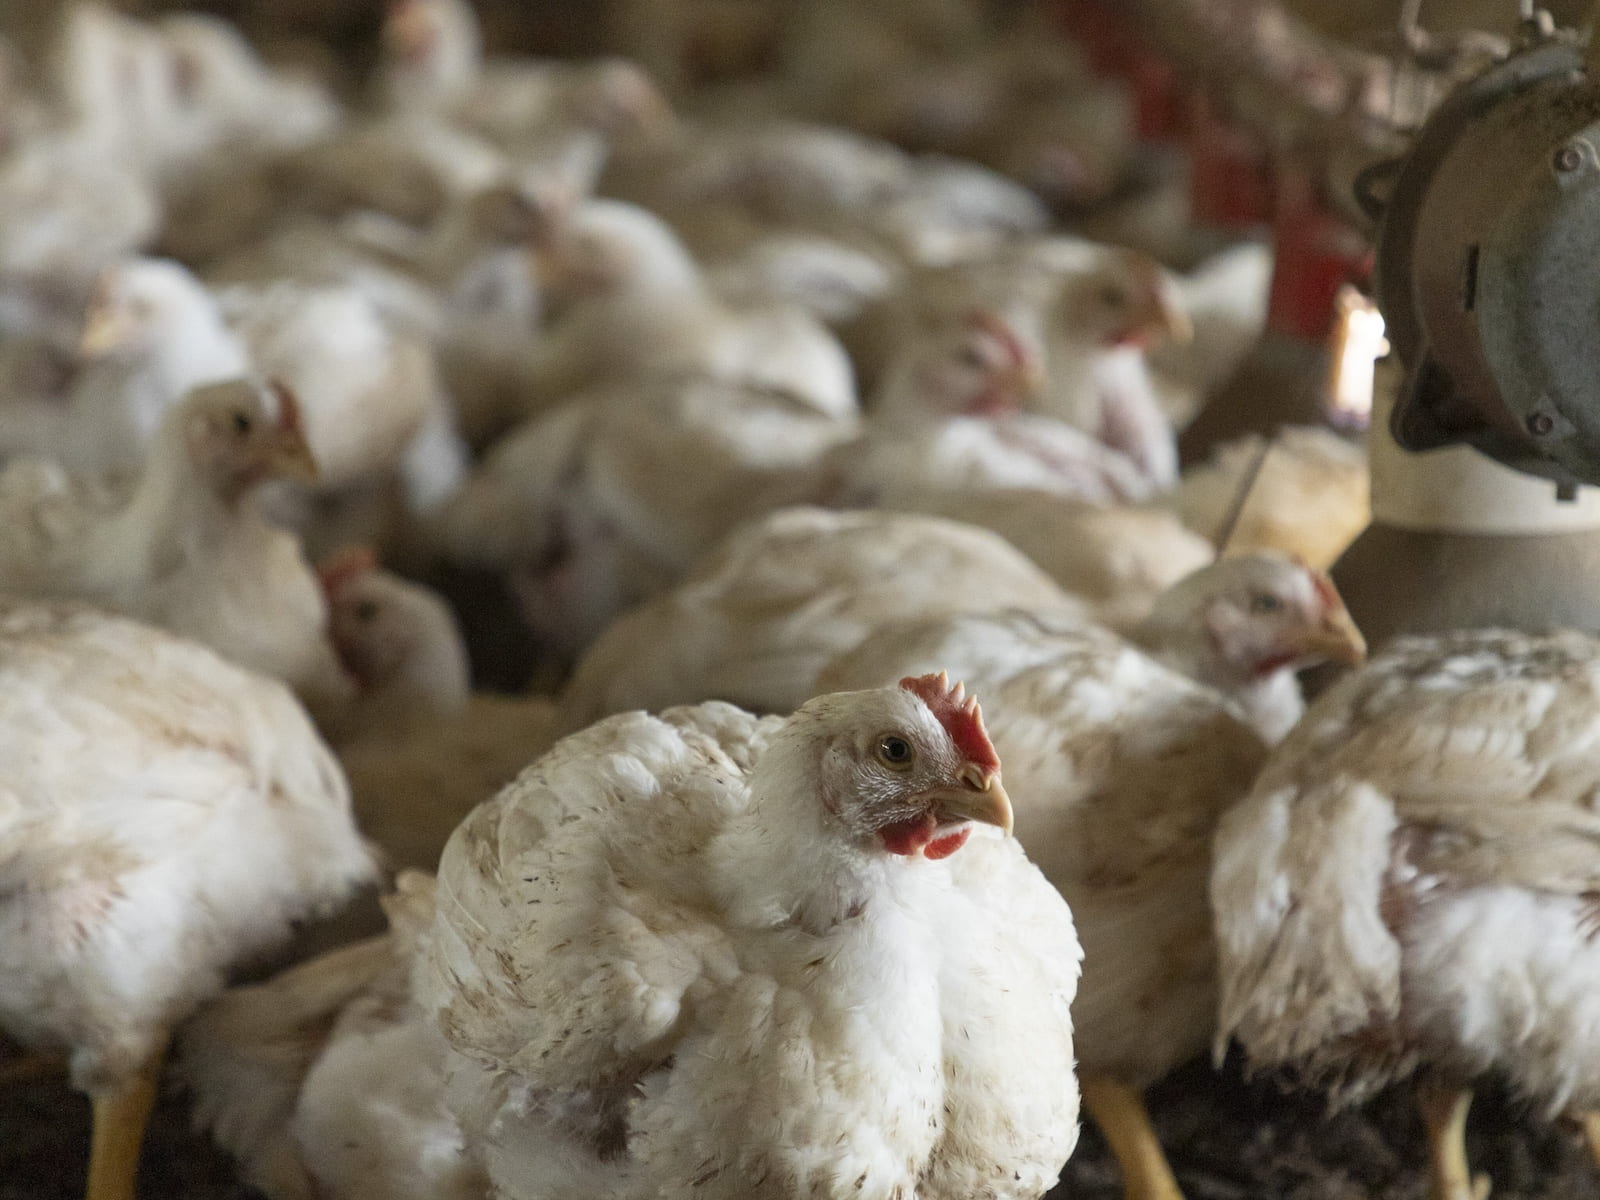 A densely packed group of white chickens inside a poultry farm, with one chicken in the foreground slightly more in focus than the others.